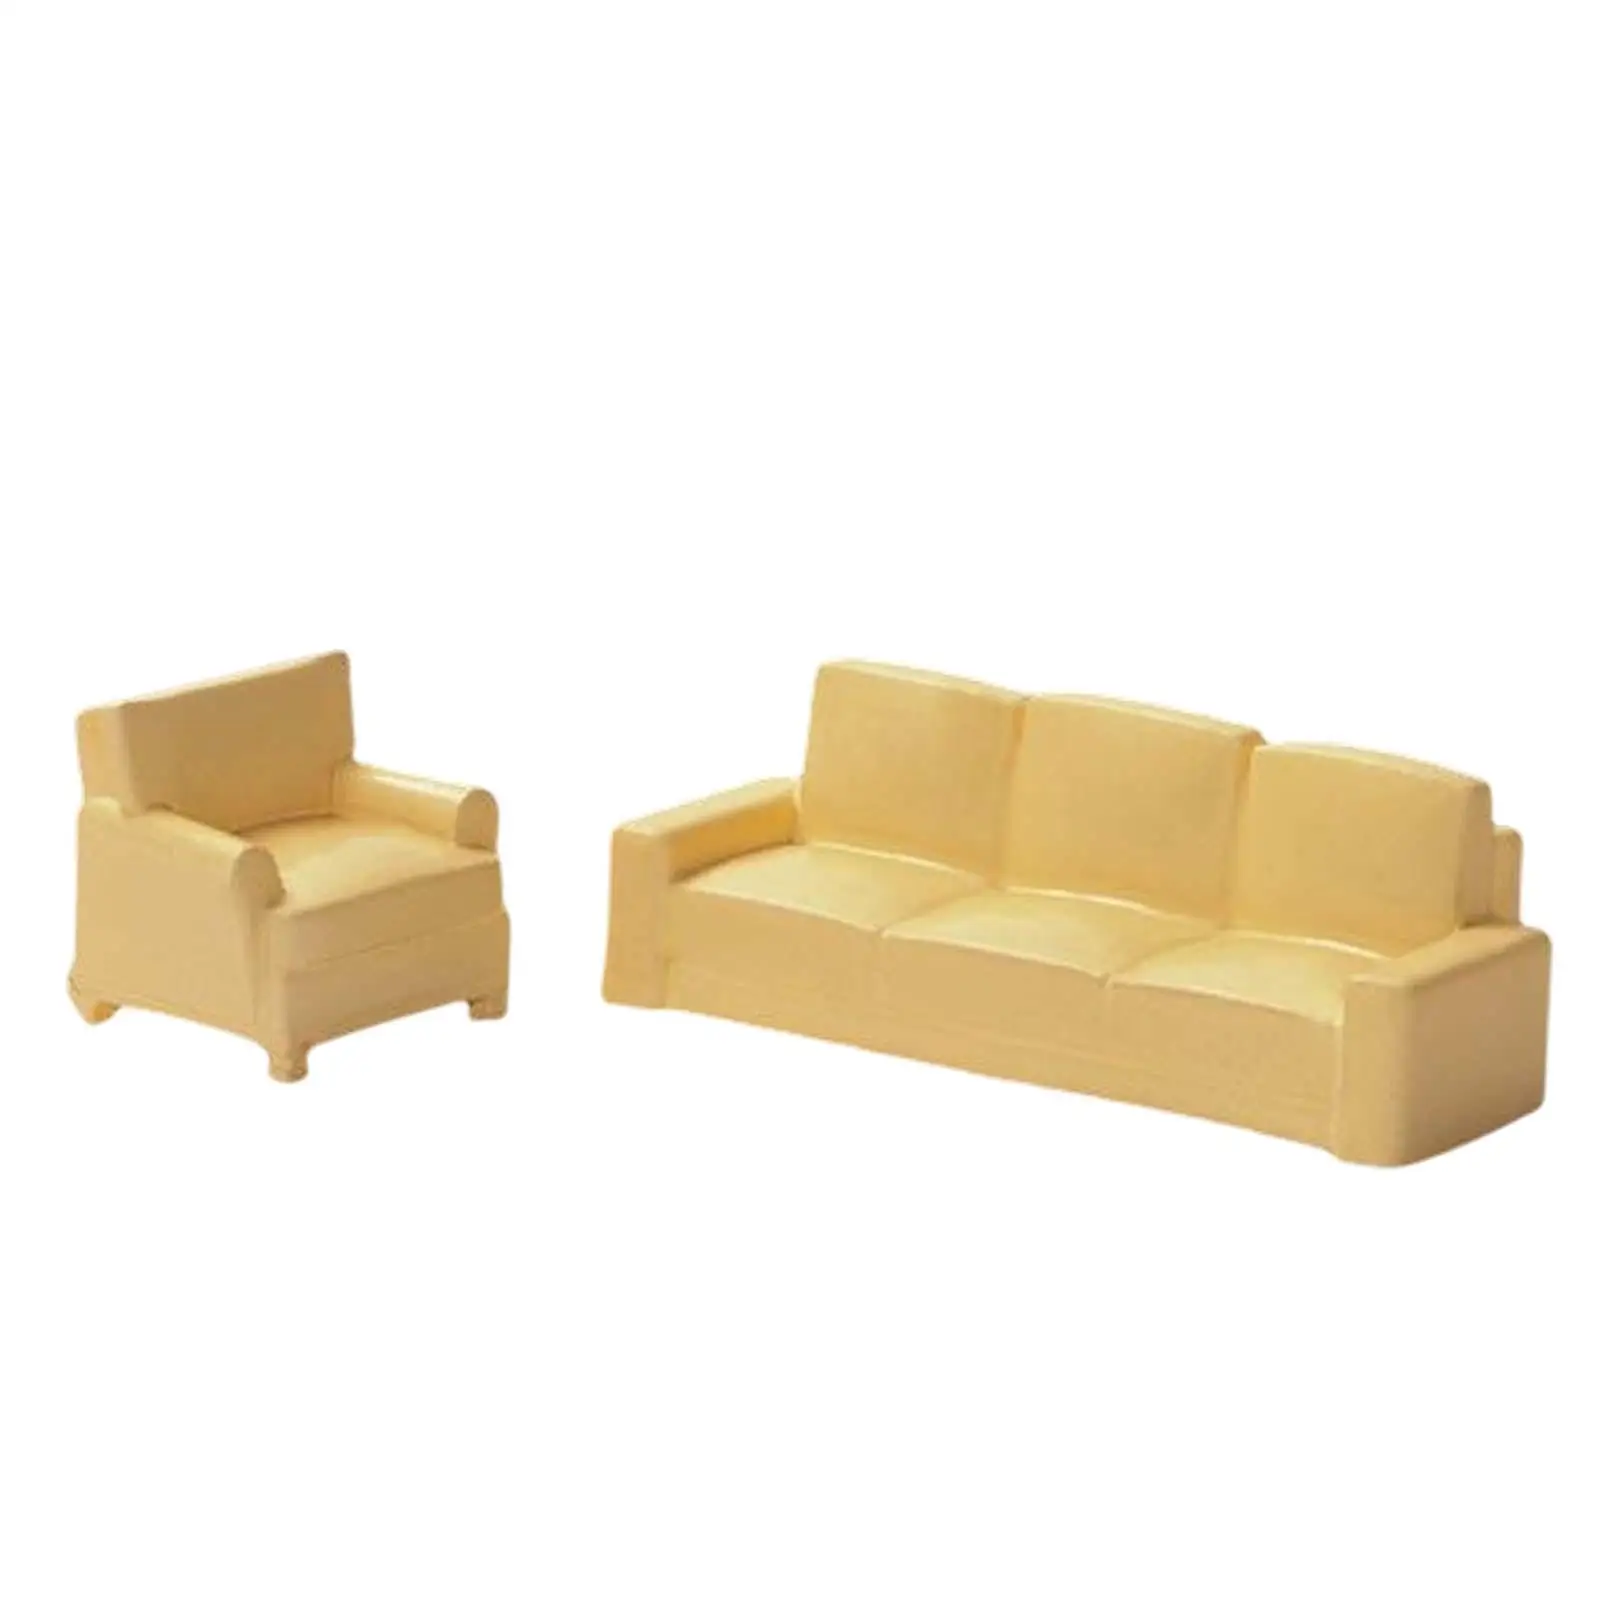 2Pcs Dollhouse Couch Dollhouse Furnishings Resin for 1/64 Dollhouse Ornament